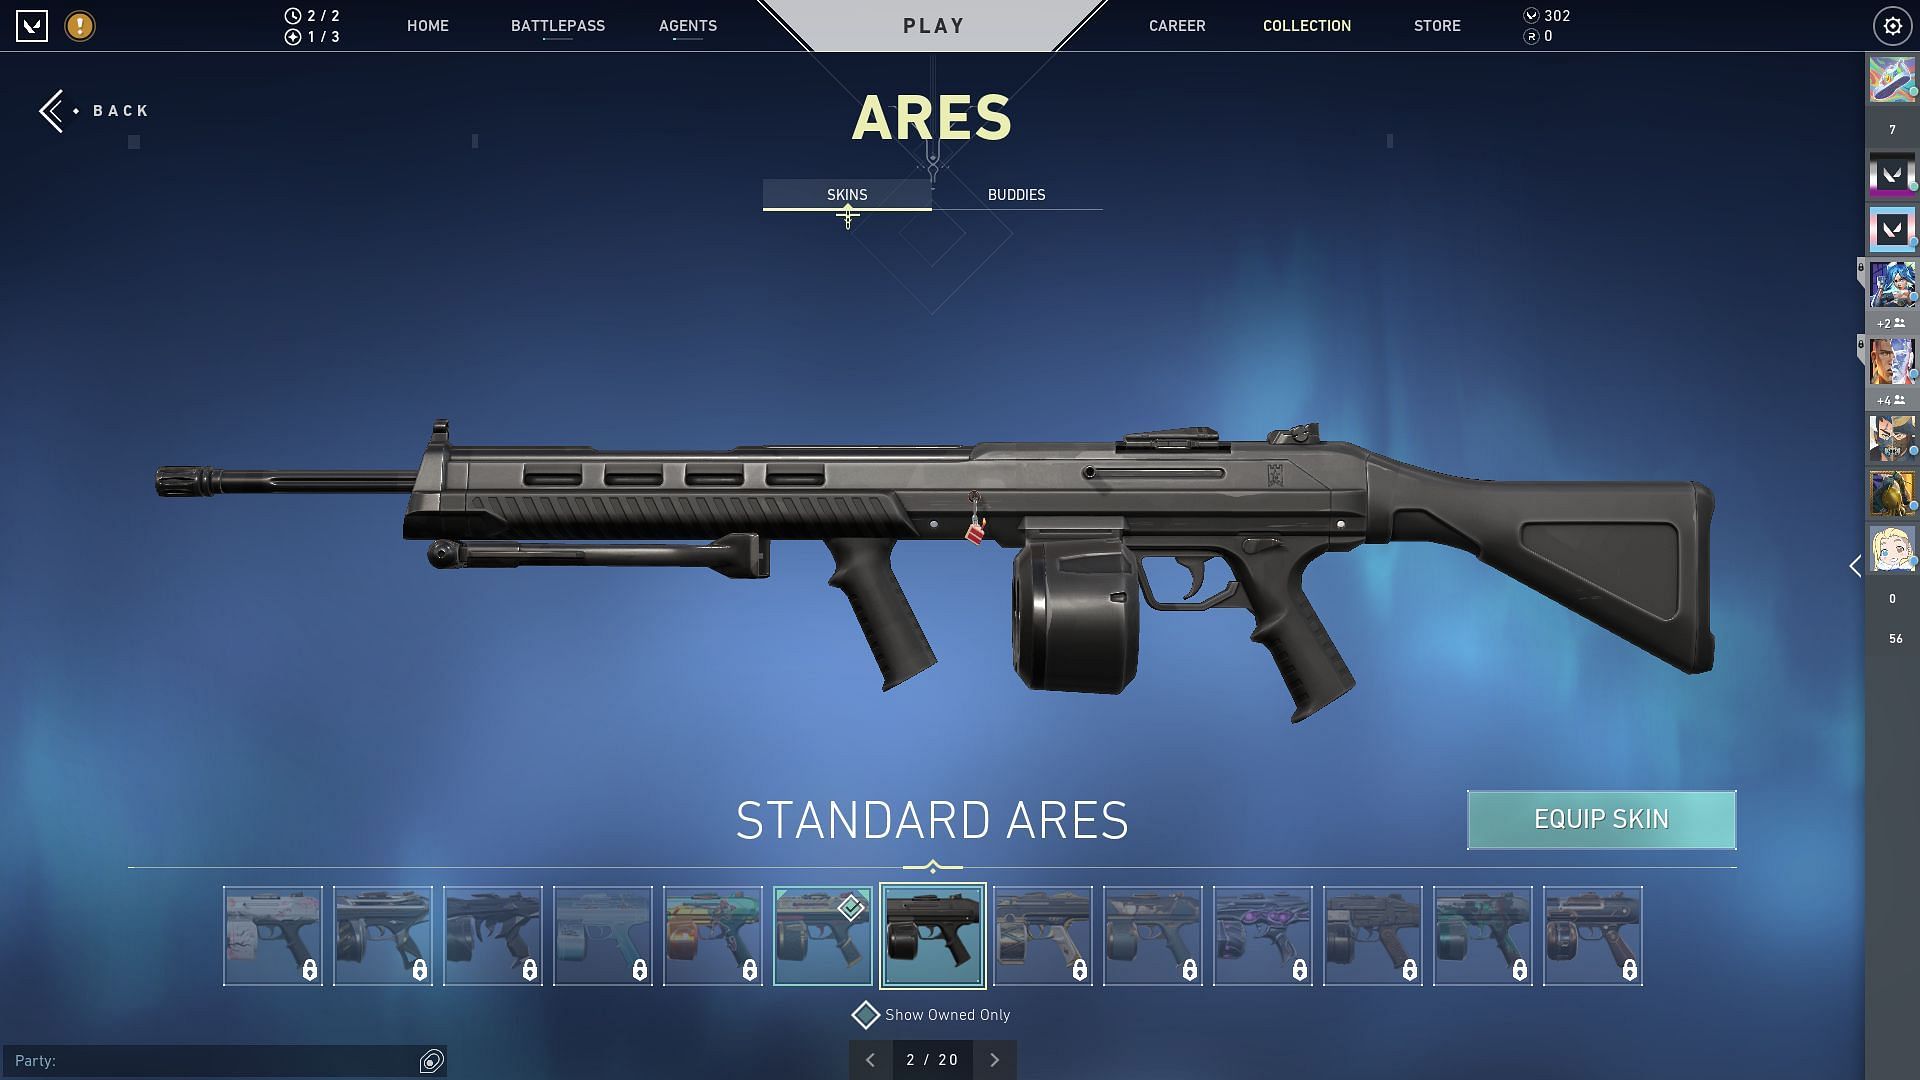 The Ares costs 1550 credits in the in-game store (Image via Sportskeeda)